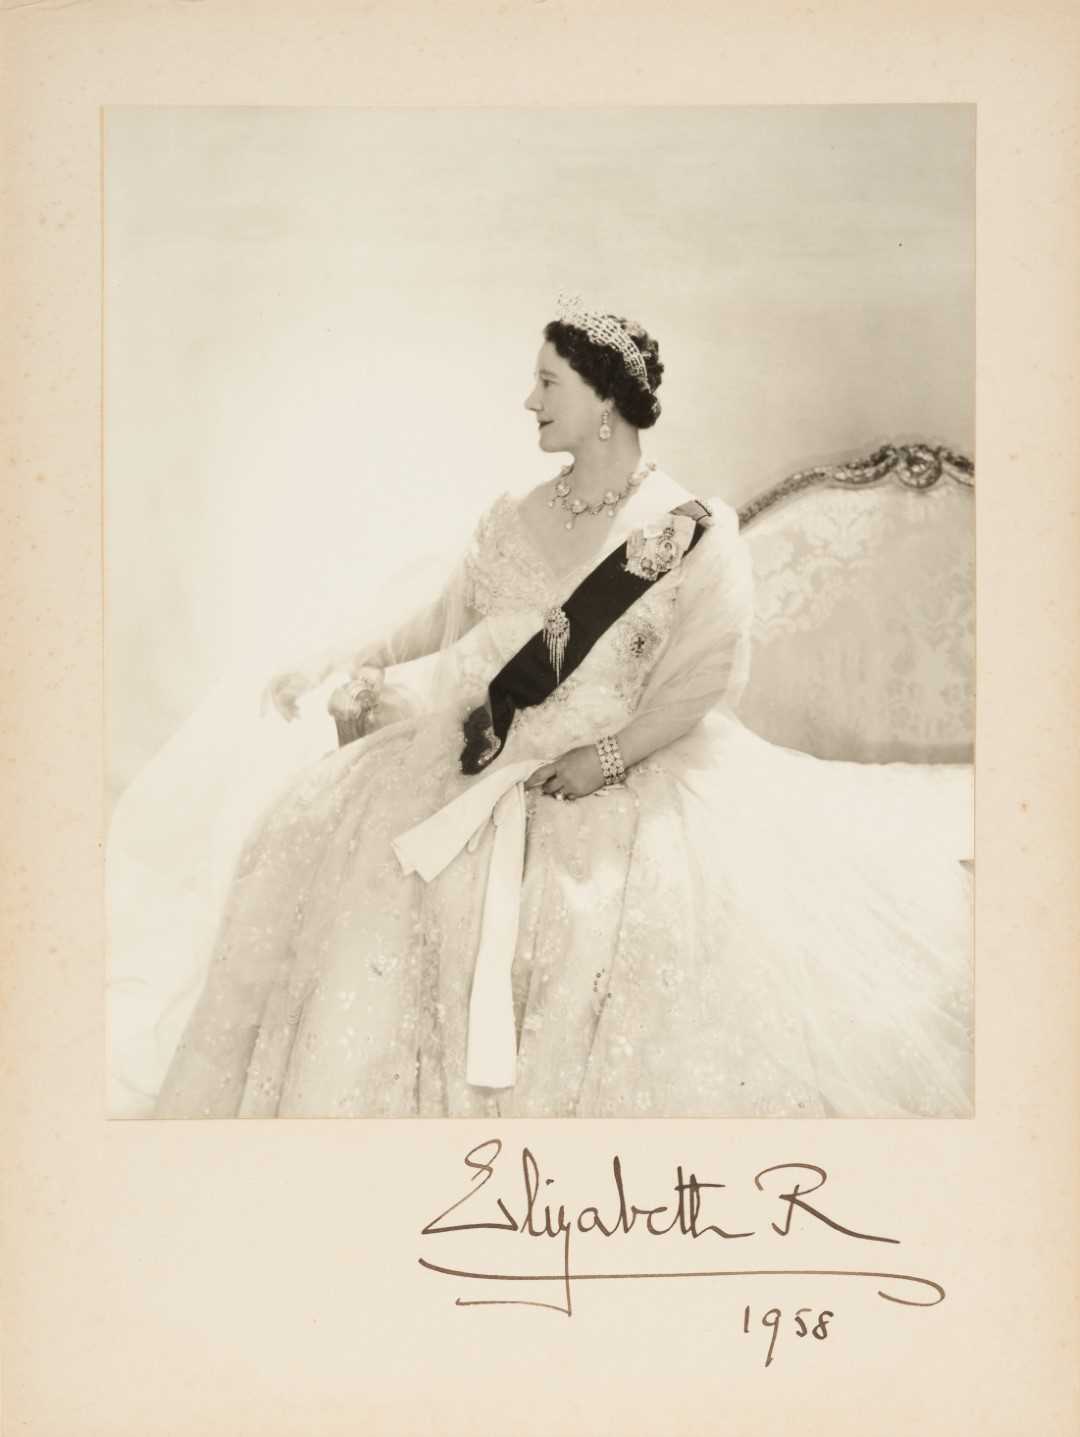 Lot 135 - H.M.Queen Elizabeth The Queen Mother, signed 1958 presentation portrait photograph by Cecil Beaton of Her Majesty wearing a beautiful ball gown, diamonds, Order of The Garter and Royal Family Order...